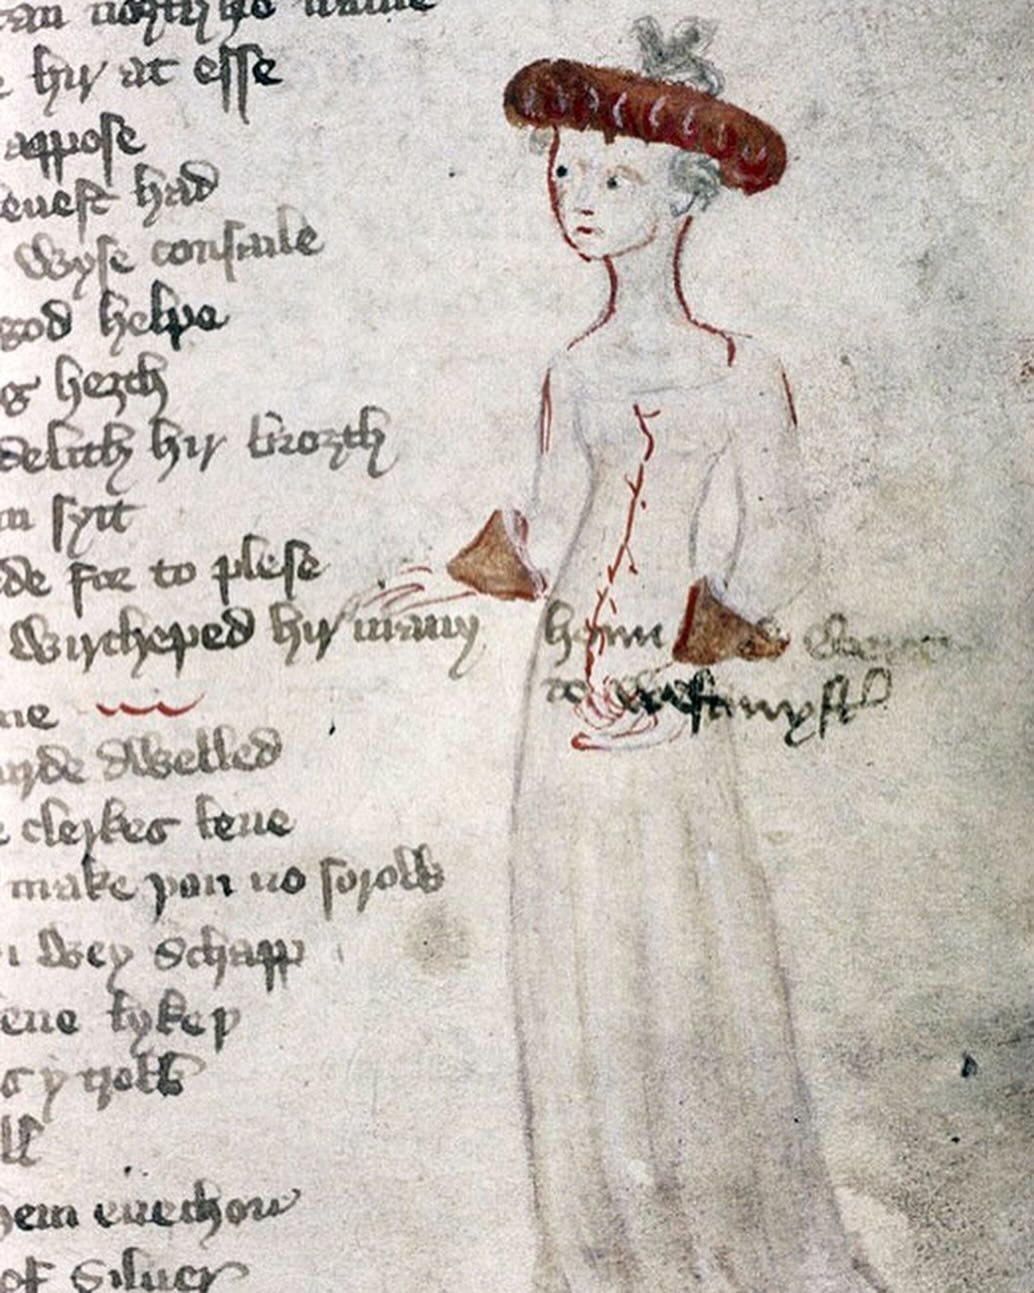 In the 1370s, William Langland wrote Piers Plowman, an allegorical poem about life and religion during the Black Death.

Langland&rsquo;s work gave us the character of Lady Meed. A female personification of money, power, and lawlessness. A woman who 